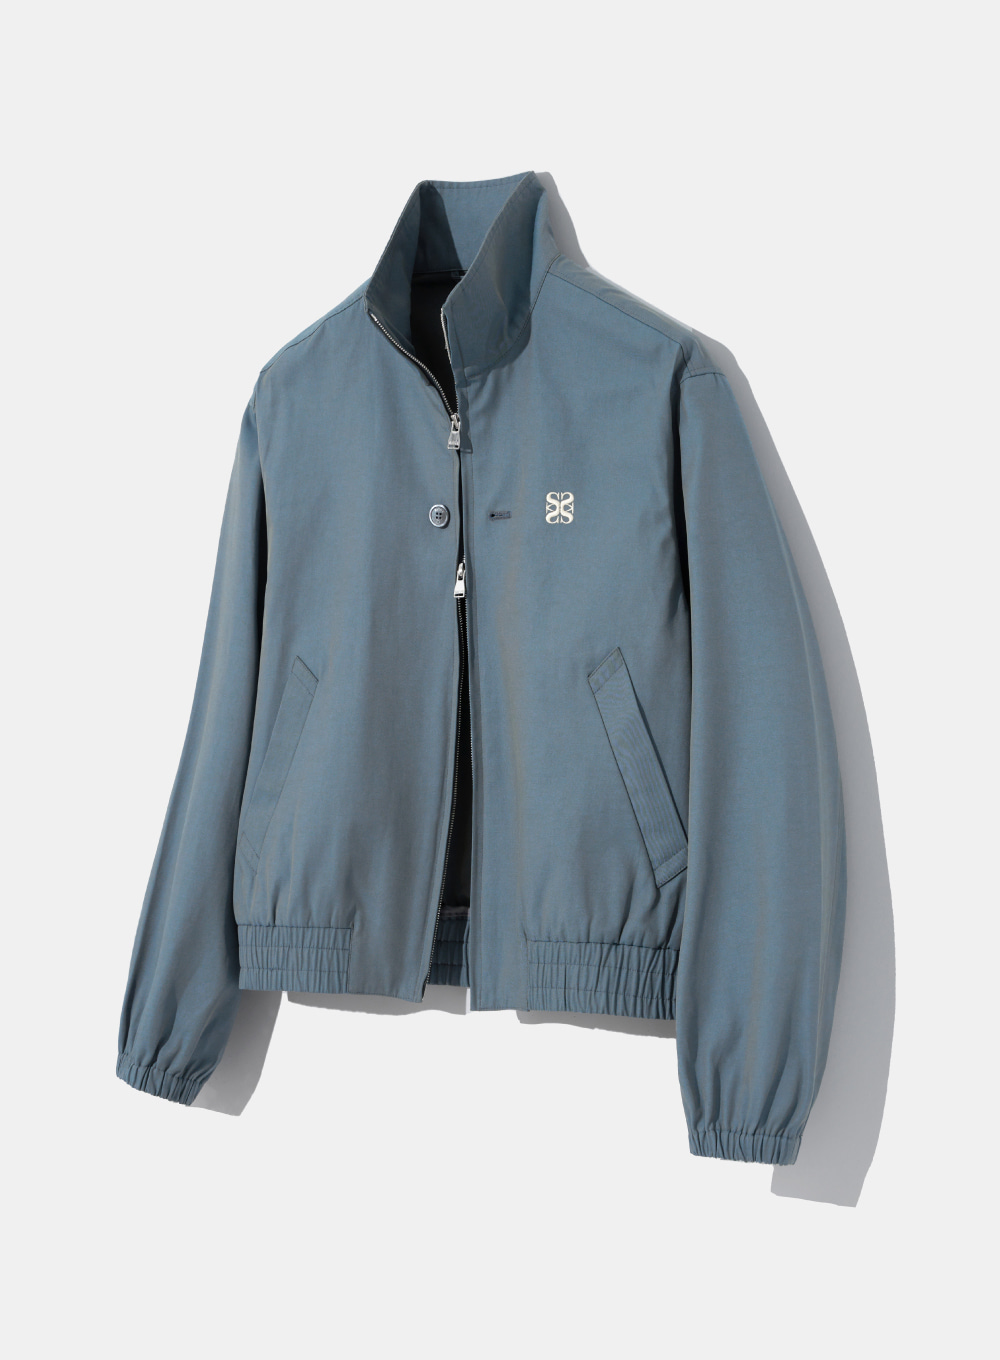 Lecce Two Tone Zip-up Jacket - Emerald Blue